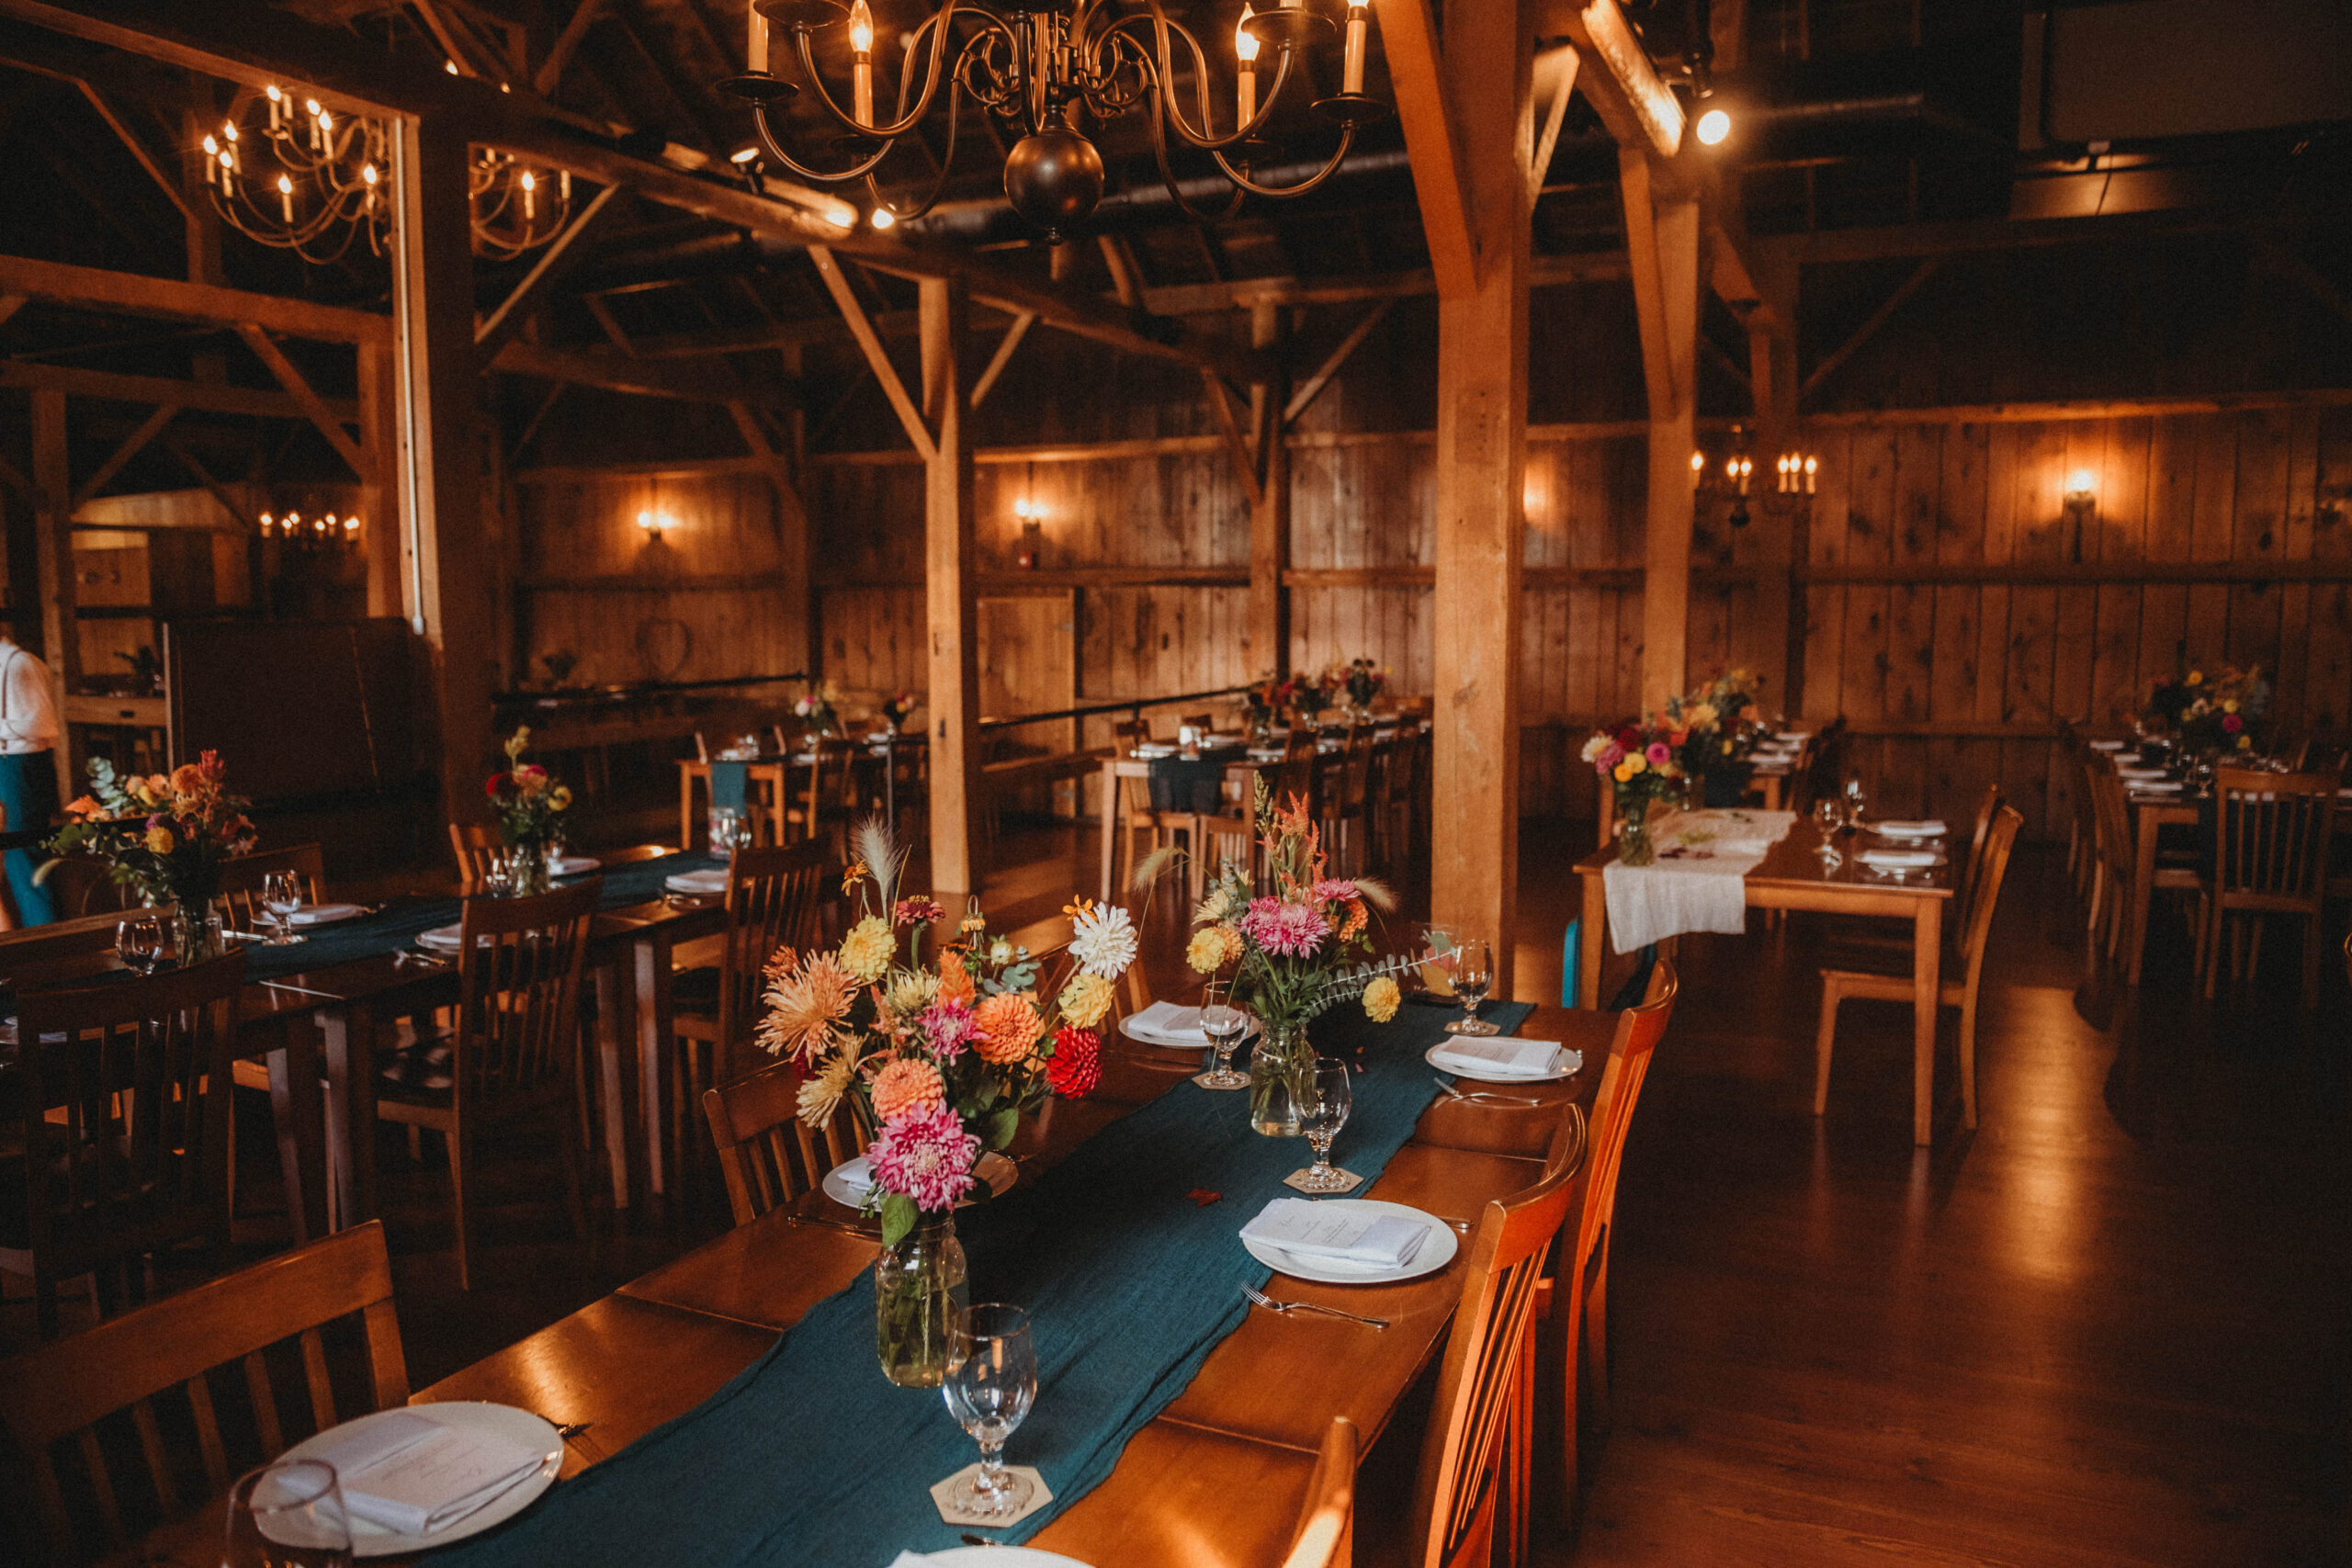 The barn interior decorated with pine green and fall florals for a rustic end of September wedding